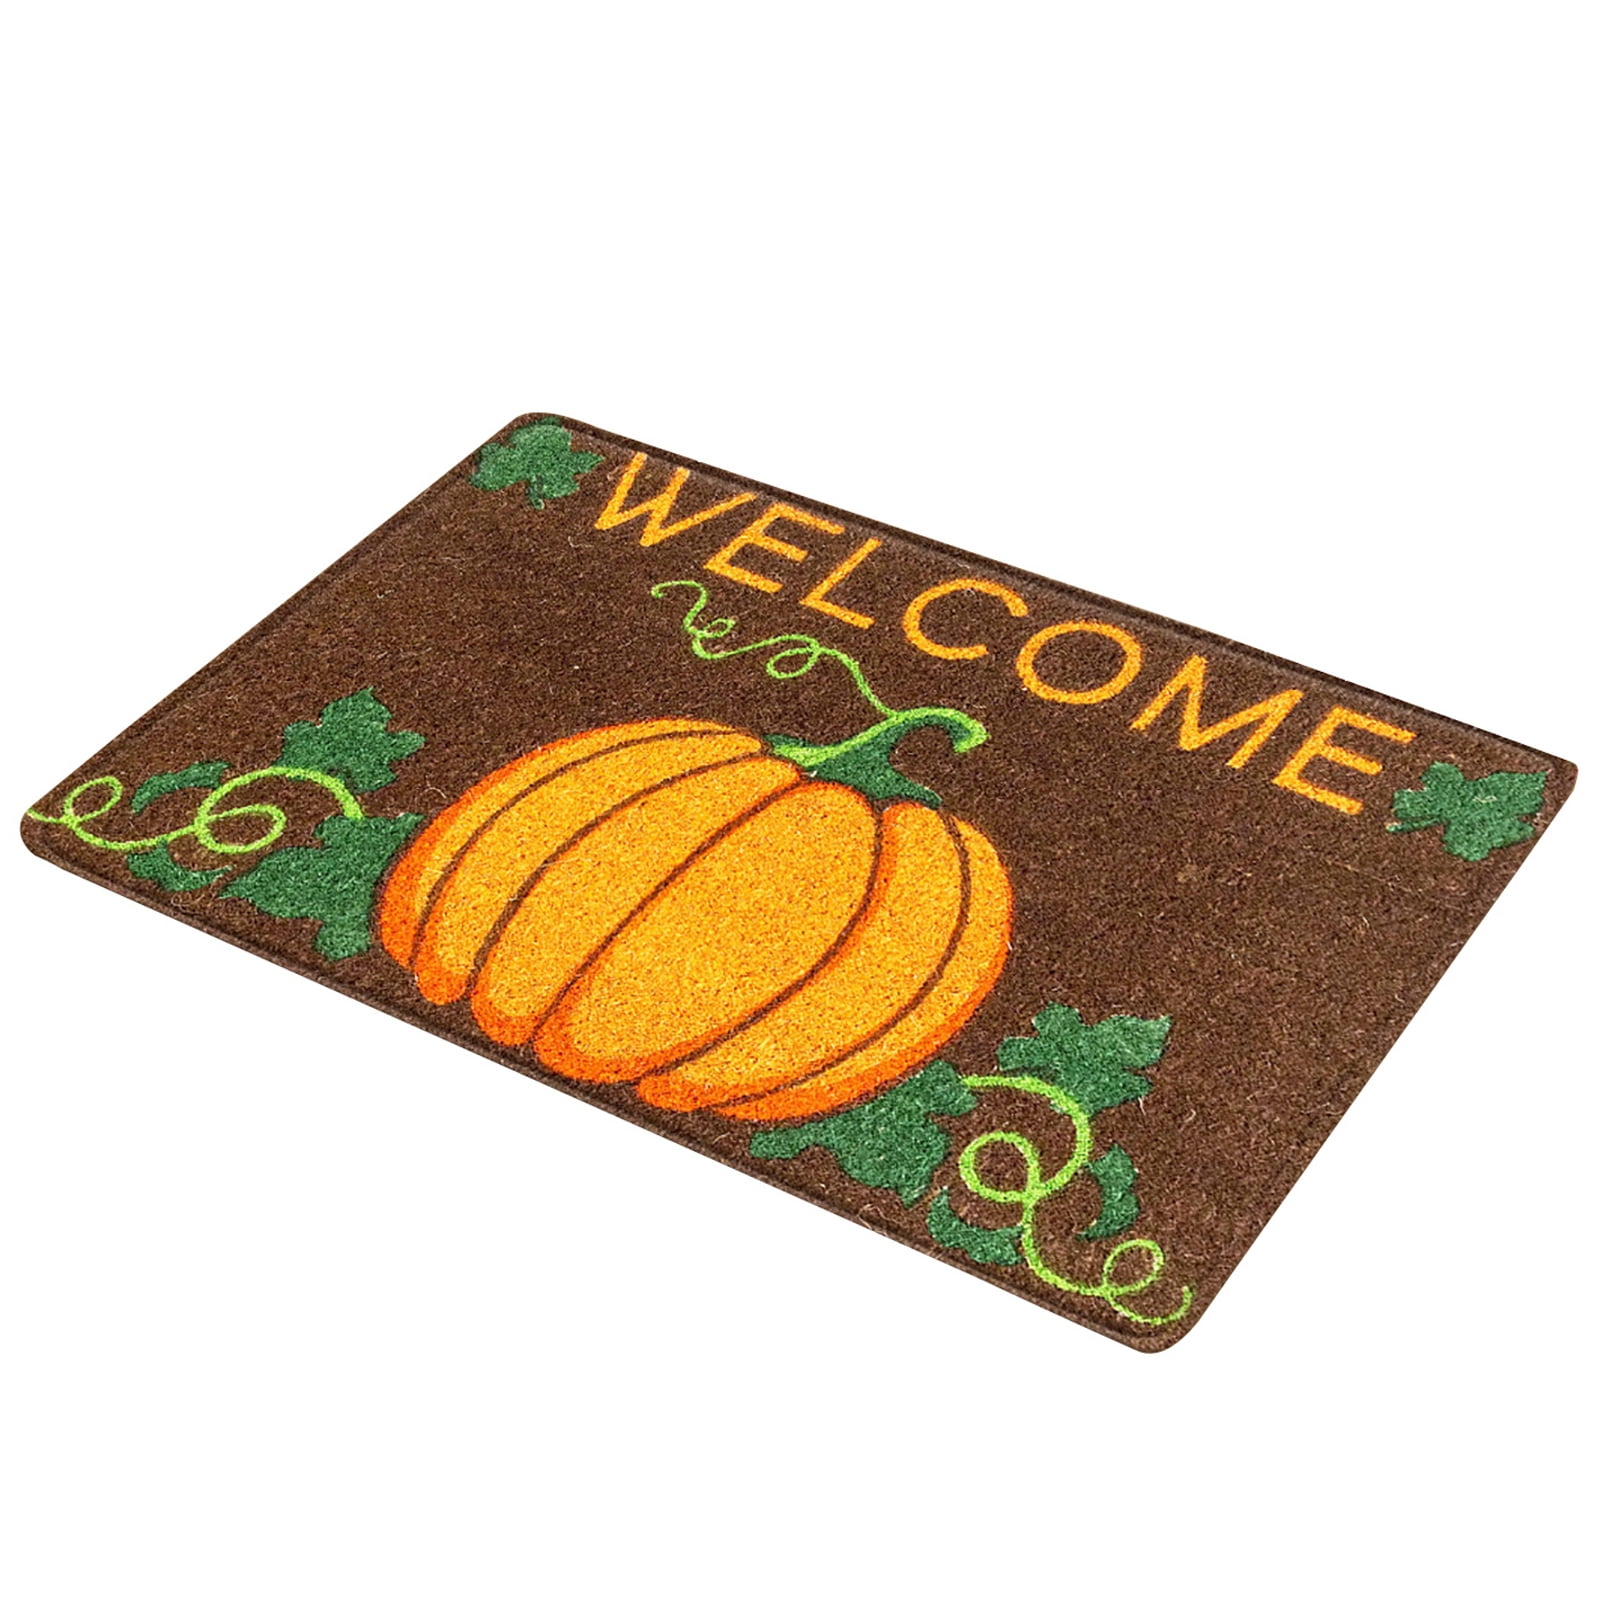 3 Ft Large Round Soft Area Rugs Halloween Funny Pumpkin Nursery Playmat Rug Mat for Kids Playing Room Bedroom Living Room Home Decorative Rug